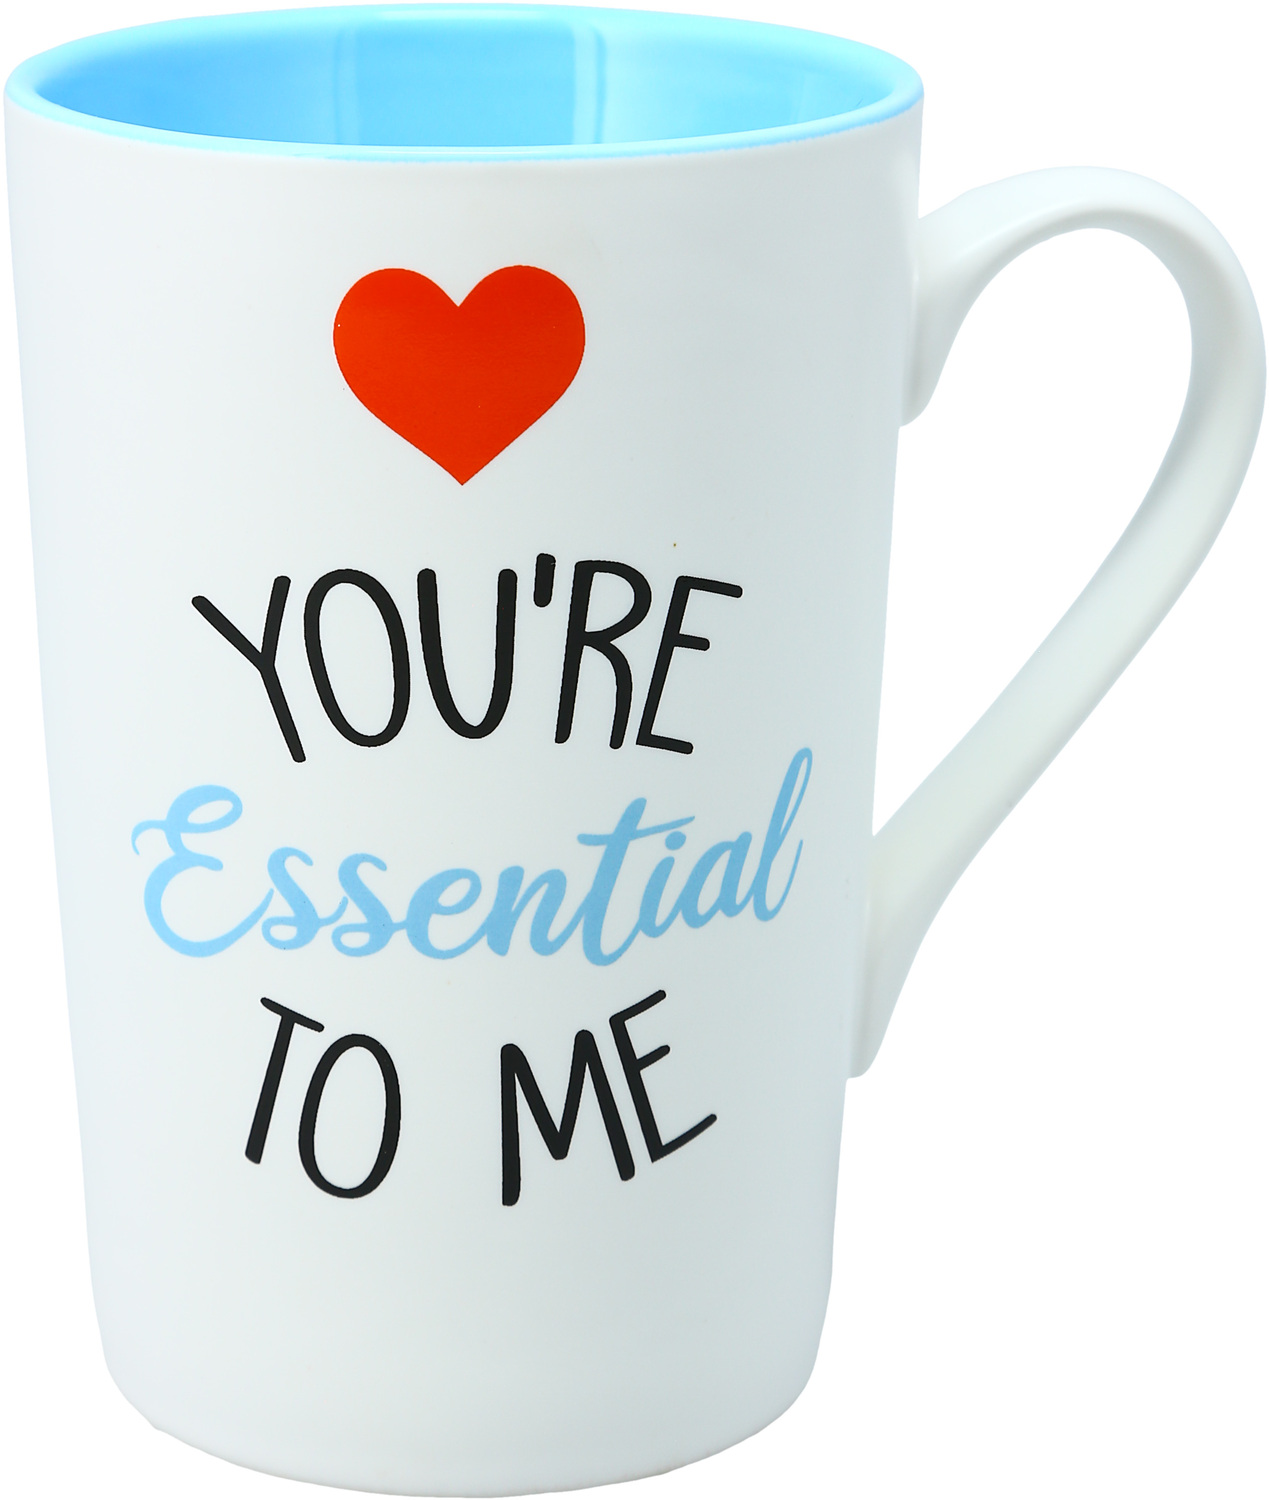 You're Essential  by Essentially Yours - You're Essential  - 15 oz Latte Cup